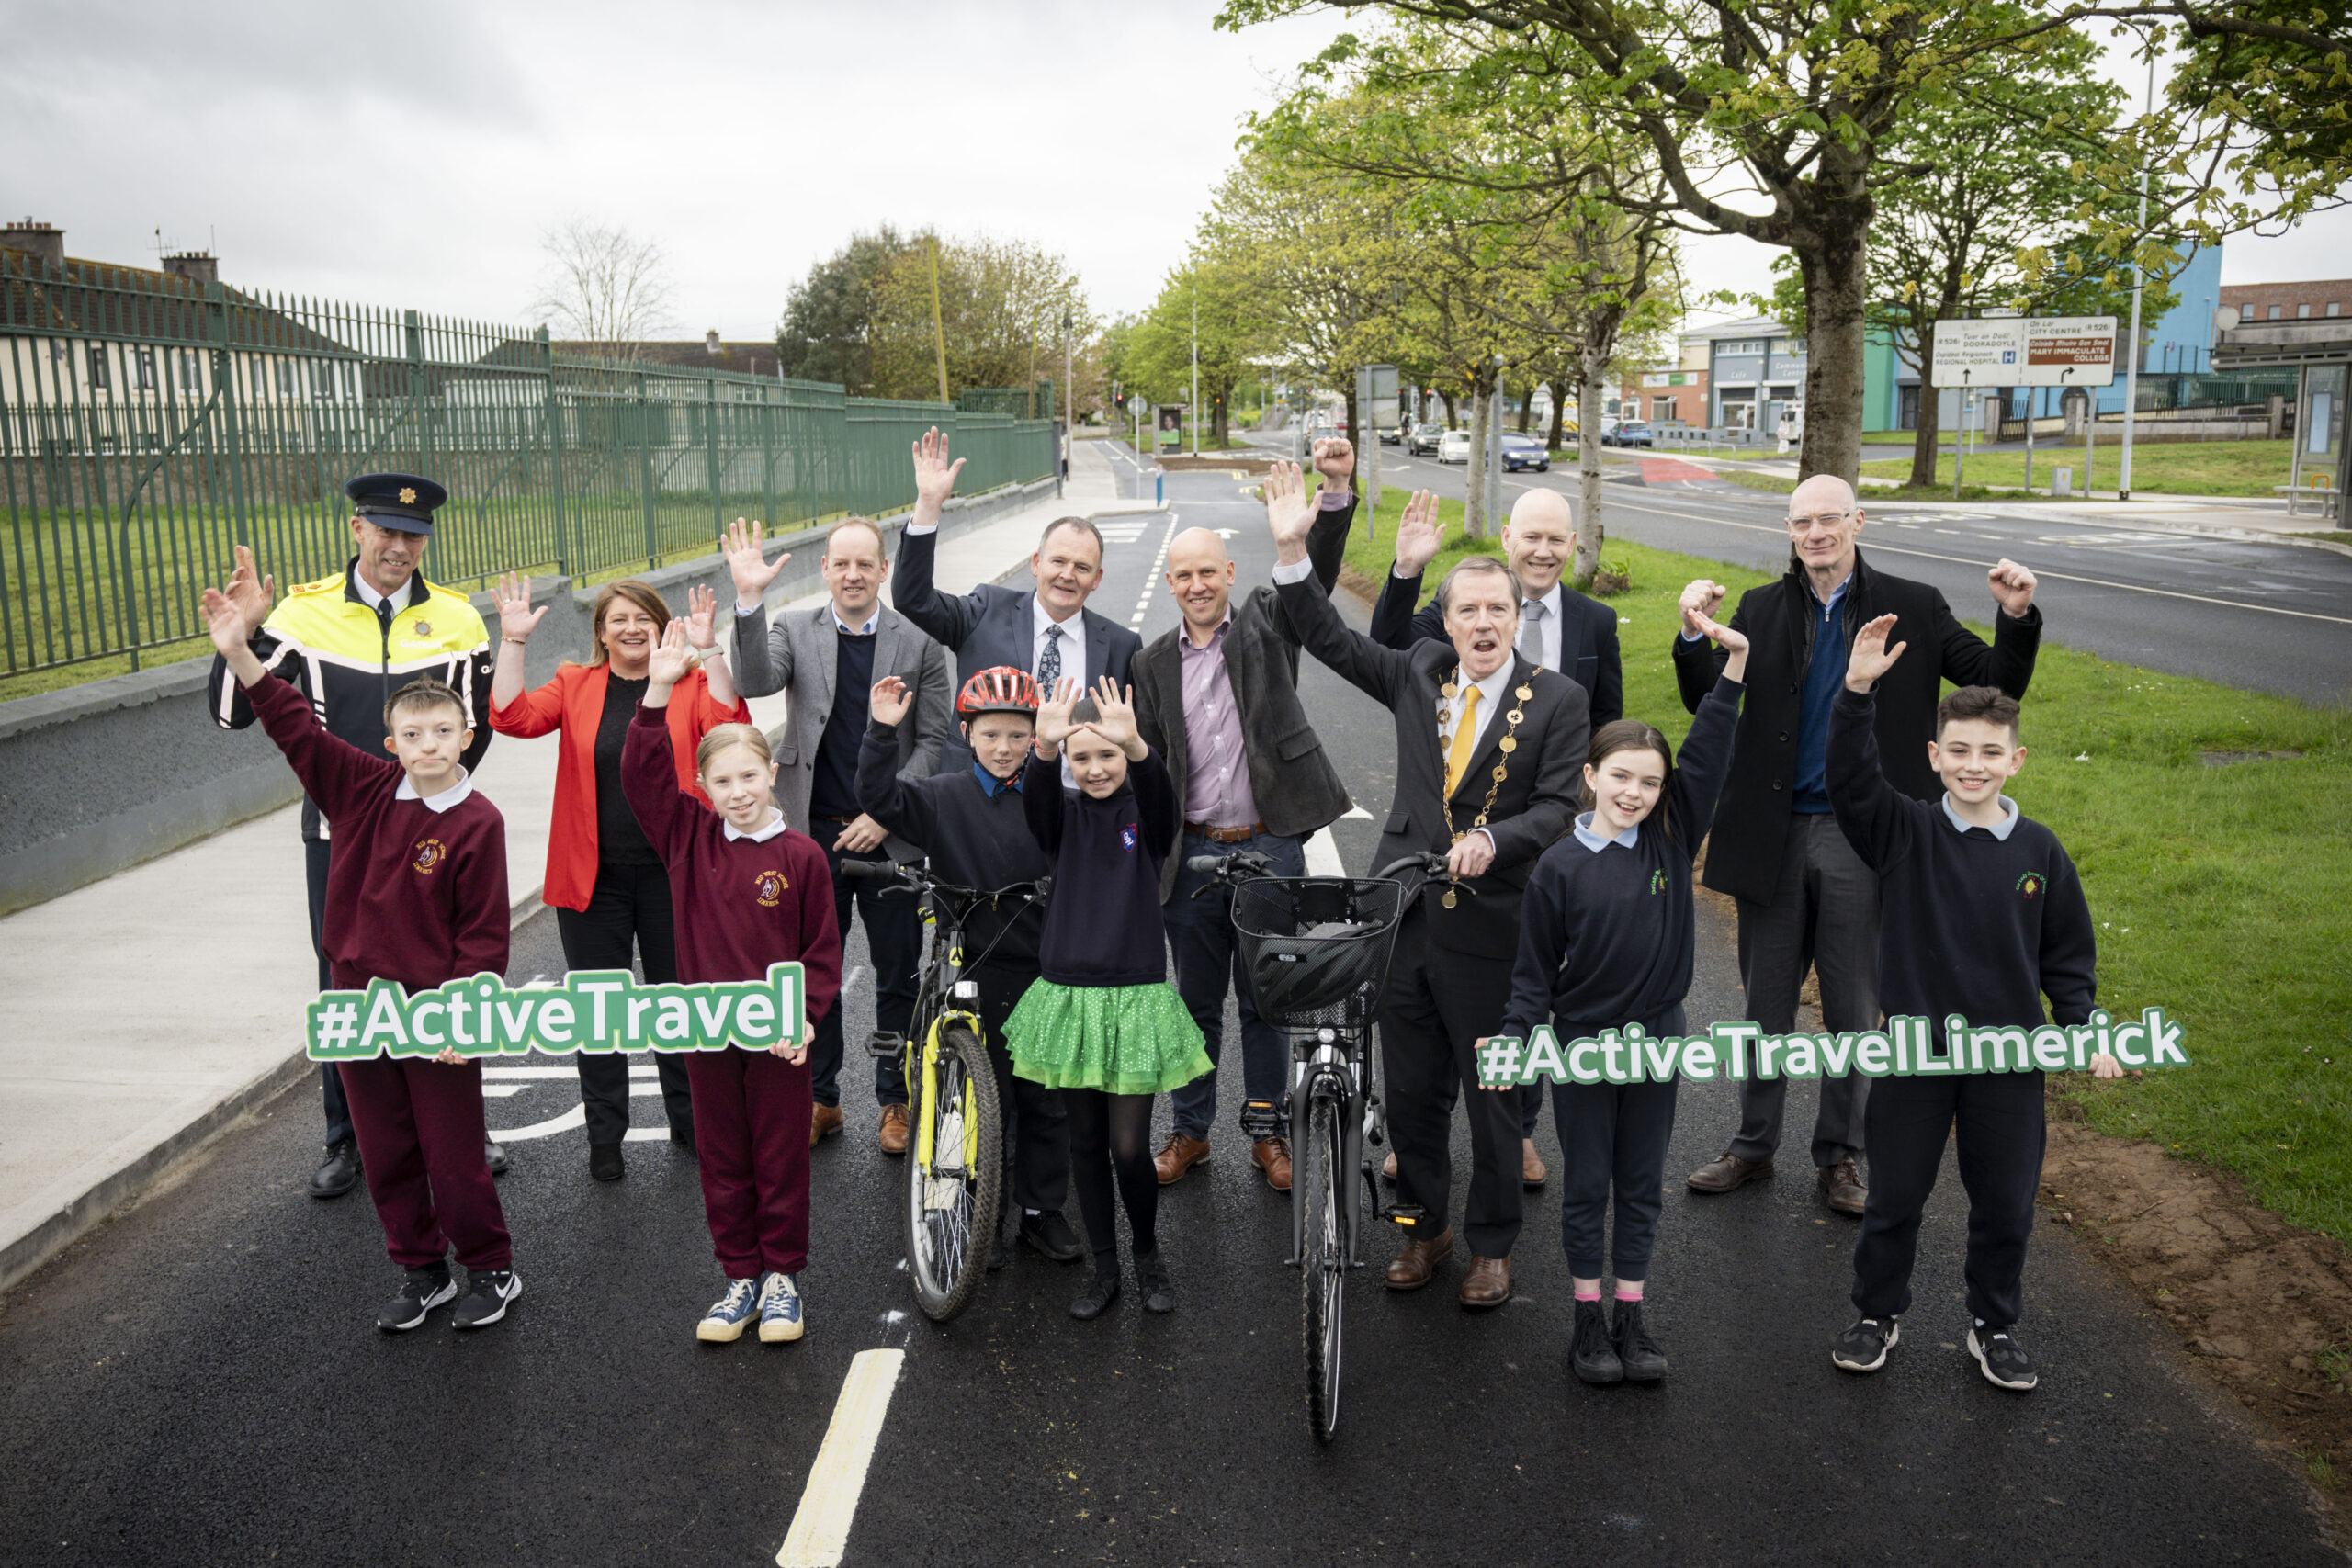 Mayor of the City and County of Limerick, Cllr Gerald Mitchell. and Jack Chambers TD, Minister of State for the Department of Transport and the Department of the Environment, Climate & Communications pictured with members of the active travel team, elected officials and Children from Our Lady of Lourdes NS, the Midwest School for the Deaf and Our Lady Queen of Peace NS pictured at the launch of the Childers Road Active Travel Scheme, which has been completed by Limerick City & County Council and funded by the National Transport Authority. It follows the completion of the section of the Scheme from the Ballinacurra Road junction to the Roxboro Roundabout, after the section from Roxboro to the Kilmallock Roundabout was finished in 2023. The works have included the installation of cycle lane separators along the route, junction tightening, footpath widening, accessibility improvements, raised tables and new pedestrian crossing points at the Roxboro Roundabout to improve safety. Safe Routes To School infrastructure has also been provided at Our Lady of Lourdes NS, the Midwest School for the Deaf and Our Lady Queen of Peace NS, Janesboro under the Scheme, along with minor improvements outside Le Cheile NS and Gaelscoil Sheoirse Clancy. Pic: Don Moloney